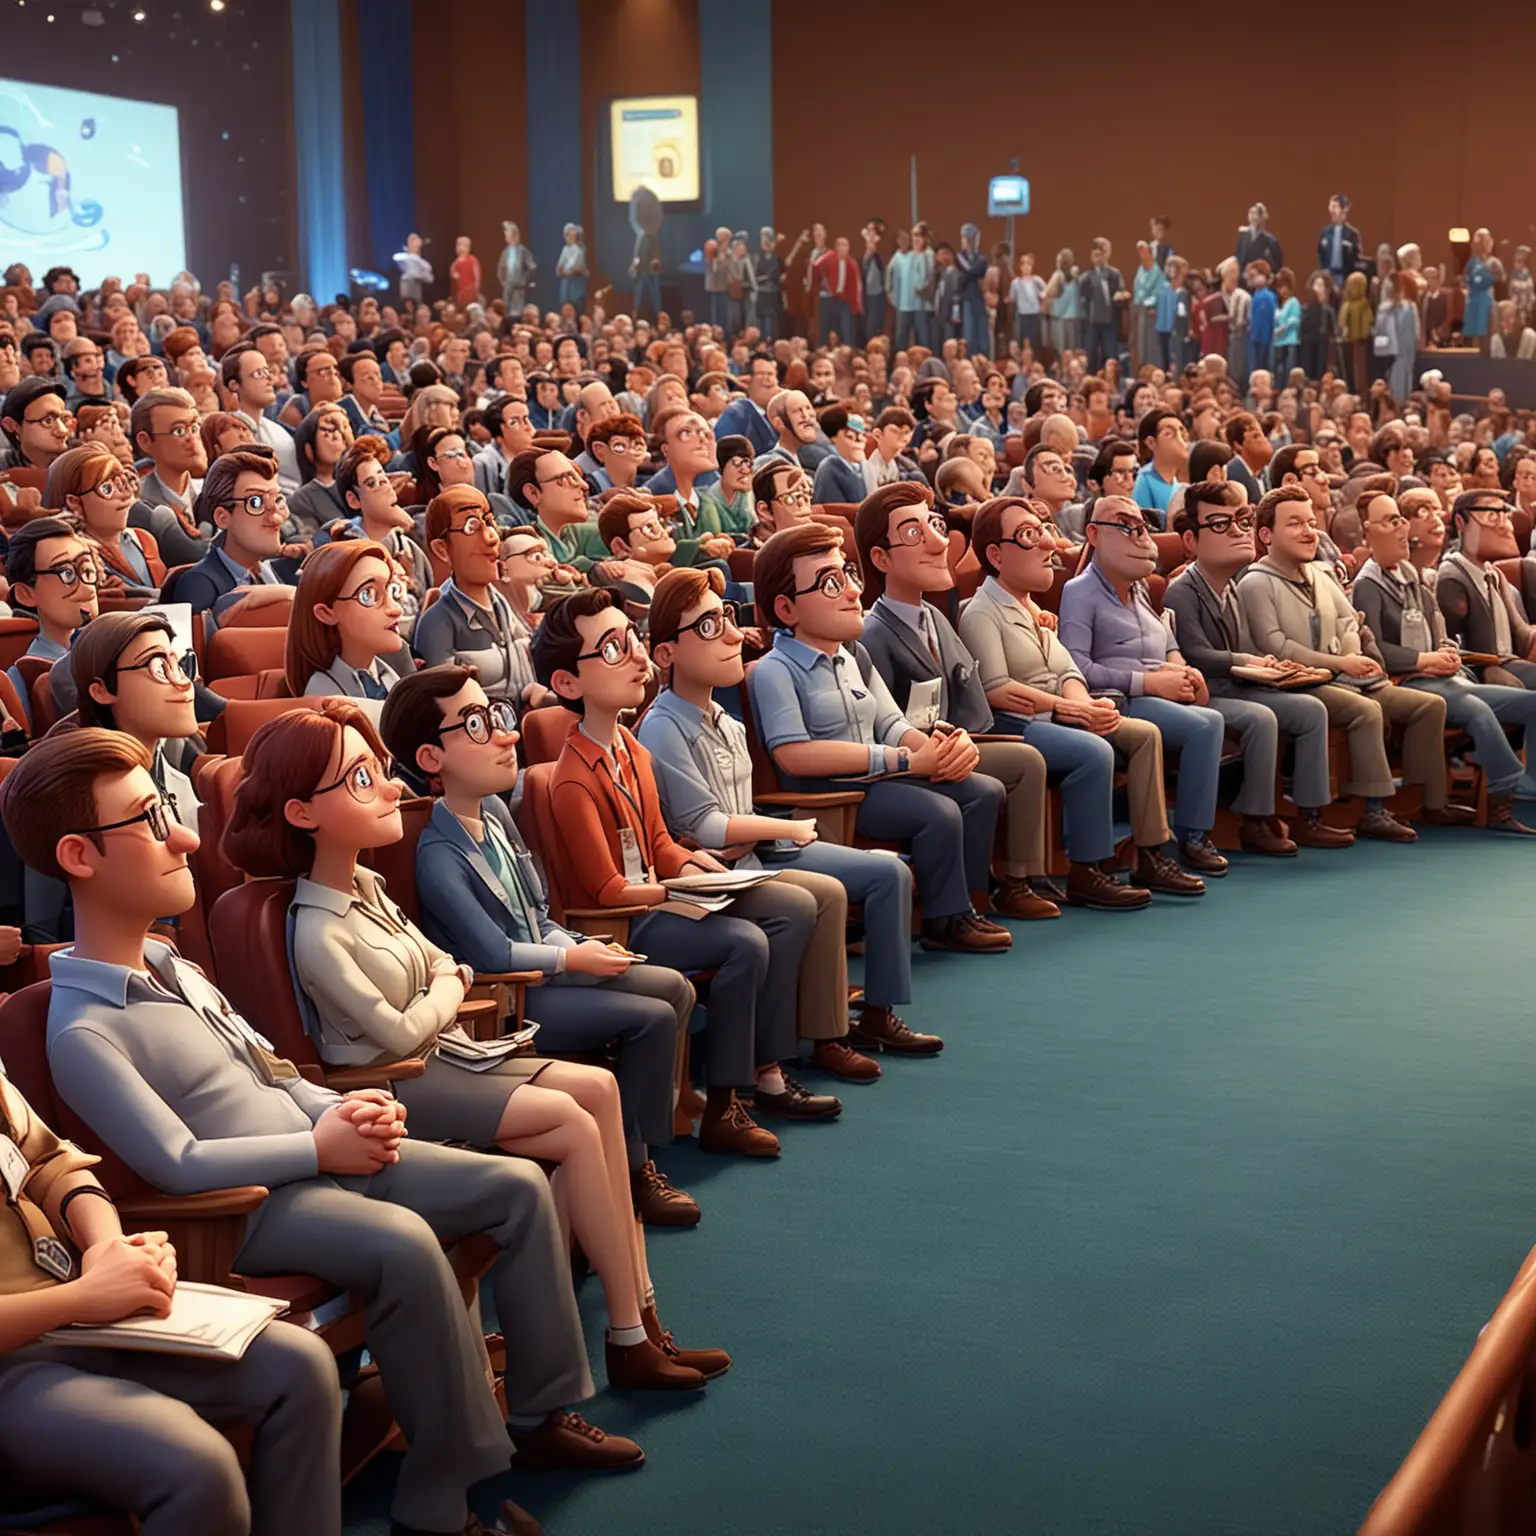 Science Conference in Disney Pixar 3D Animation Style